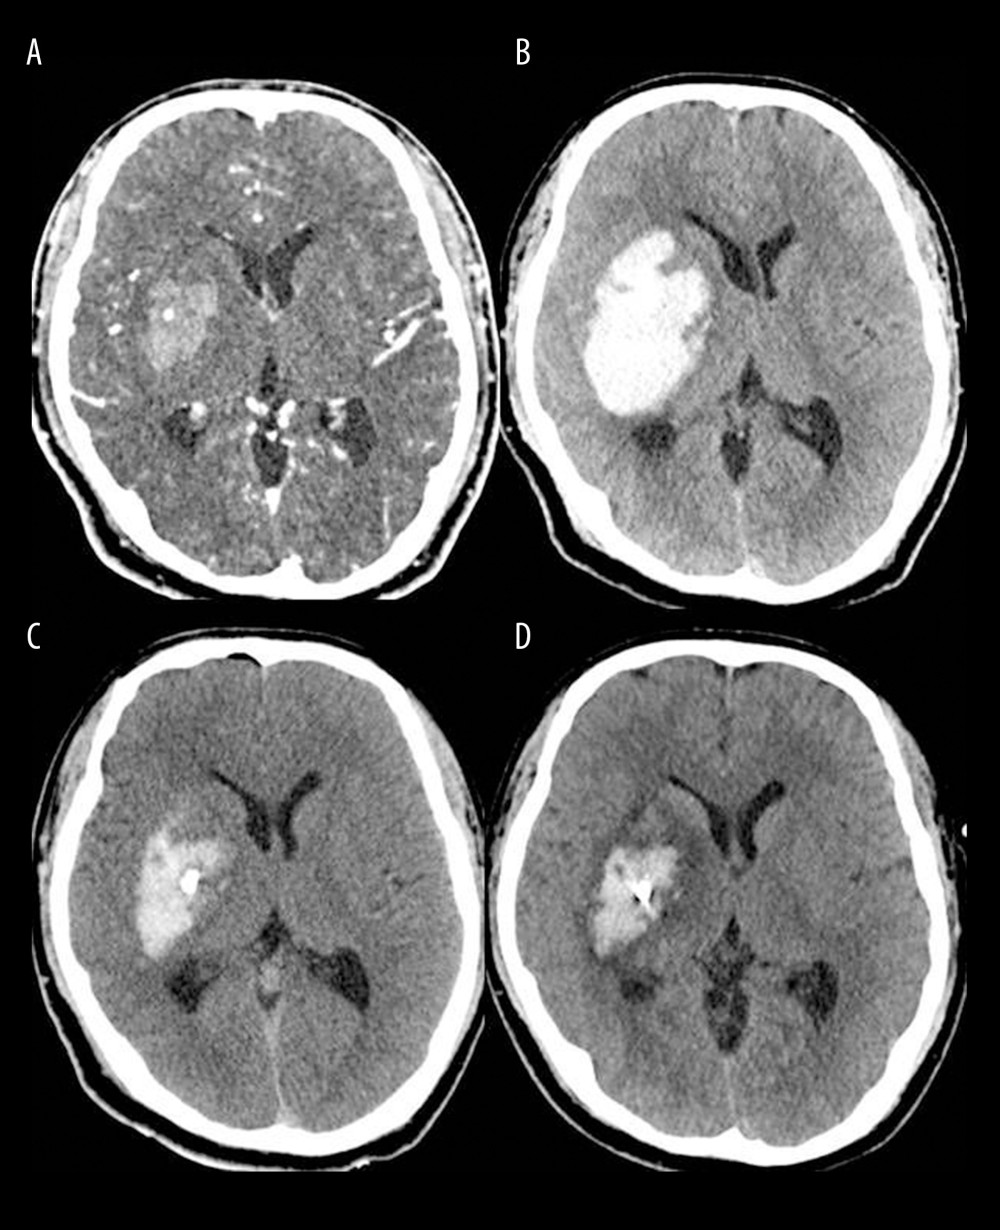 Brain computed tomography (CT) scans of a successful case of hematoma removal using single-catheter insertion in neuronavigation-assisted stereotactic aspiration and thrombolysis surgery(A) Spontaneous intracerebral hemorrhage of 15 mL in the right basal ganglia with the spot sign on the initial CT angiography scan. (B) Marked volume enlargement on the follow-up CT scan (57 mL). (C) Remarkable decrease in the hematoma volume after single-catheter insertion on the postoperative CT scan. (D) Approximately 80% of the hematoma had been removed as a result of tissue plasminogen activator administration on the follow-up CT scan 2 days after surgery. The figure was created by the author from the PACS database of our institution using FastStone capture 9.0 (FastStone Soft).